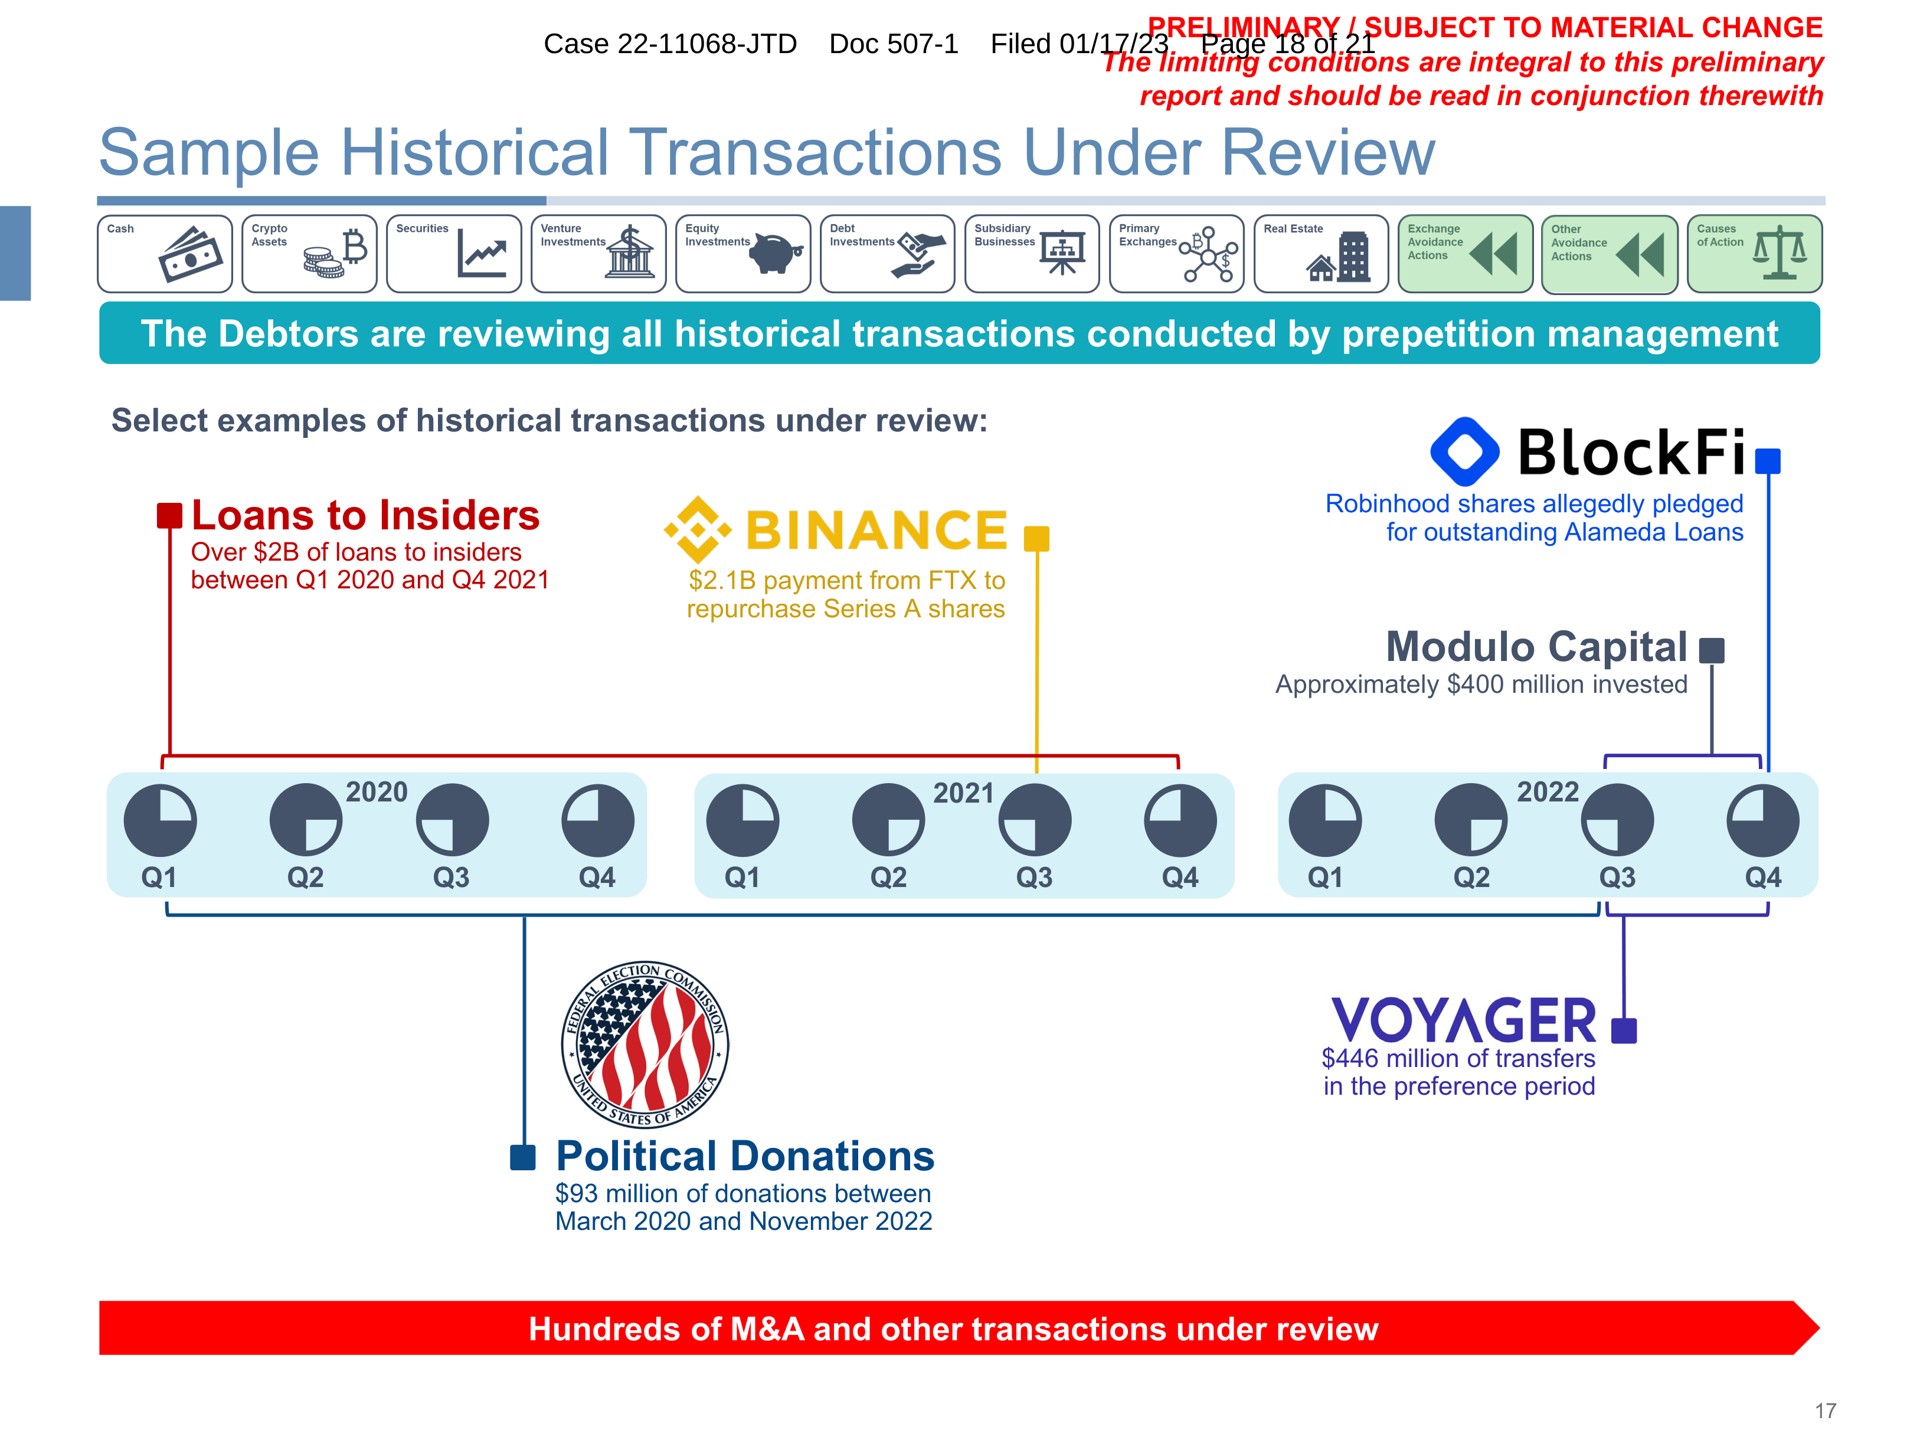 sample historical transactions under review the debtors are reviewing all historical transactions conducted by prepetition management select examples of historical transactions under review loans to insiders modulo capital political donations hundreds of a and other transactions under review case doc voyager | FTX Trading